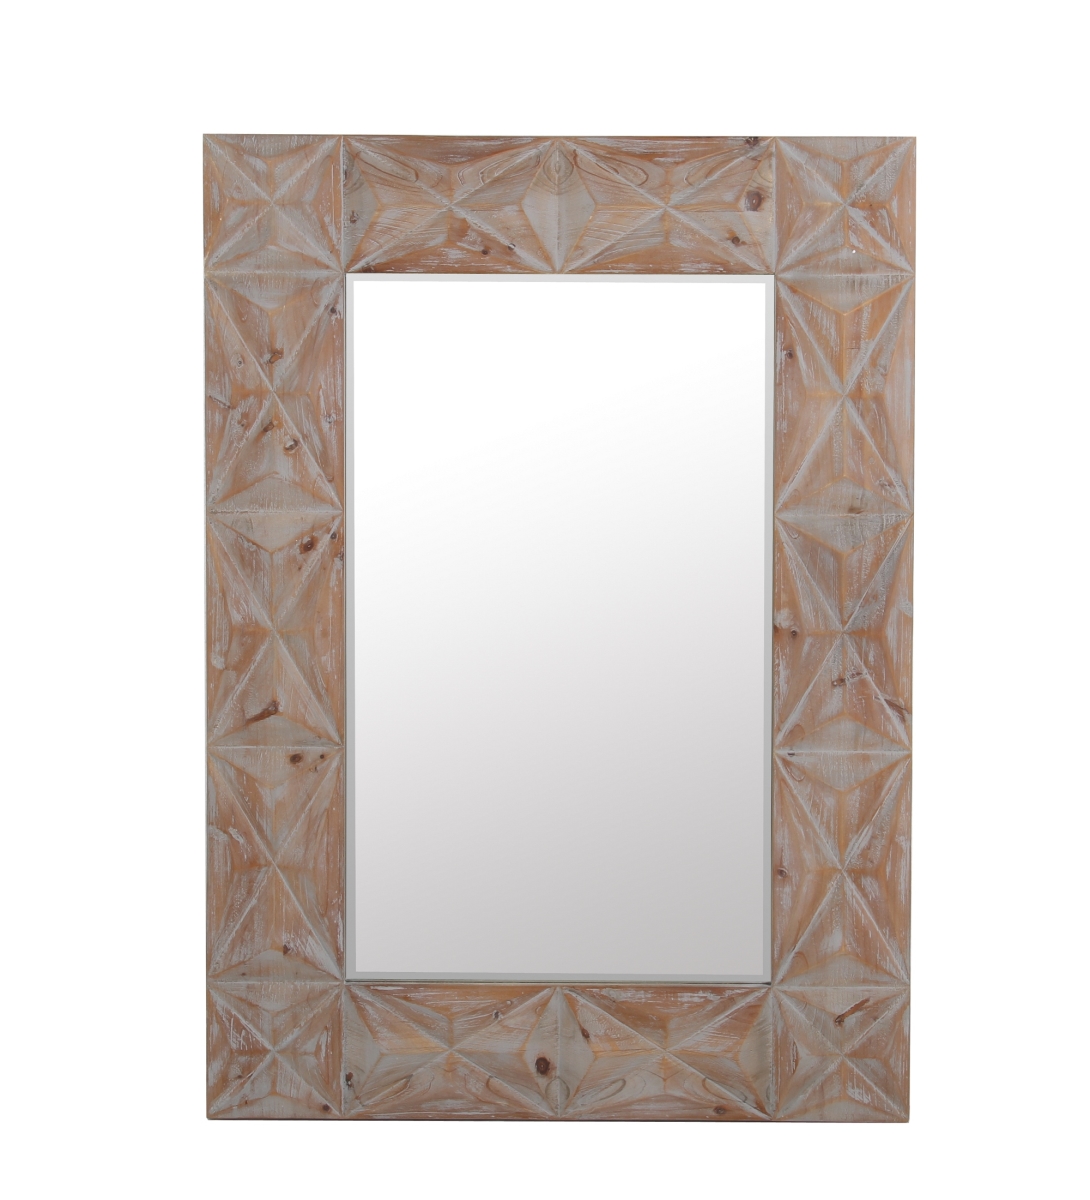 UPC 805572000324 product image for 006-00001 30 x 2 x 43 in. Transitional Wood Wall Mirror, Brown | upcitemdb.com